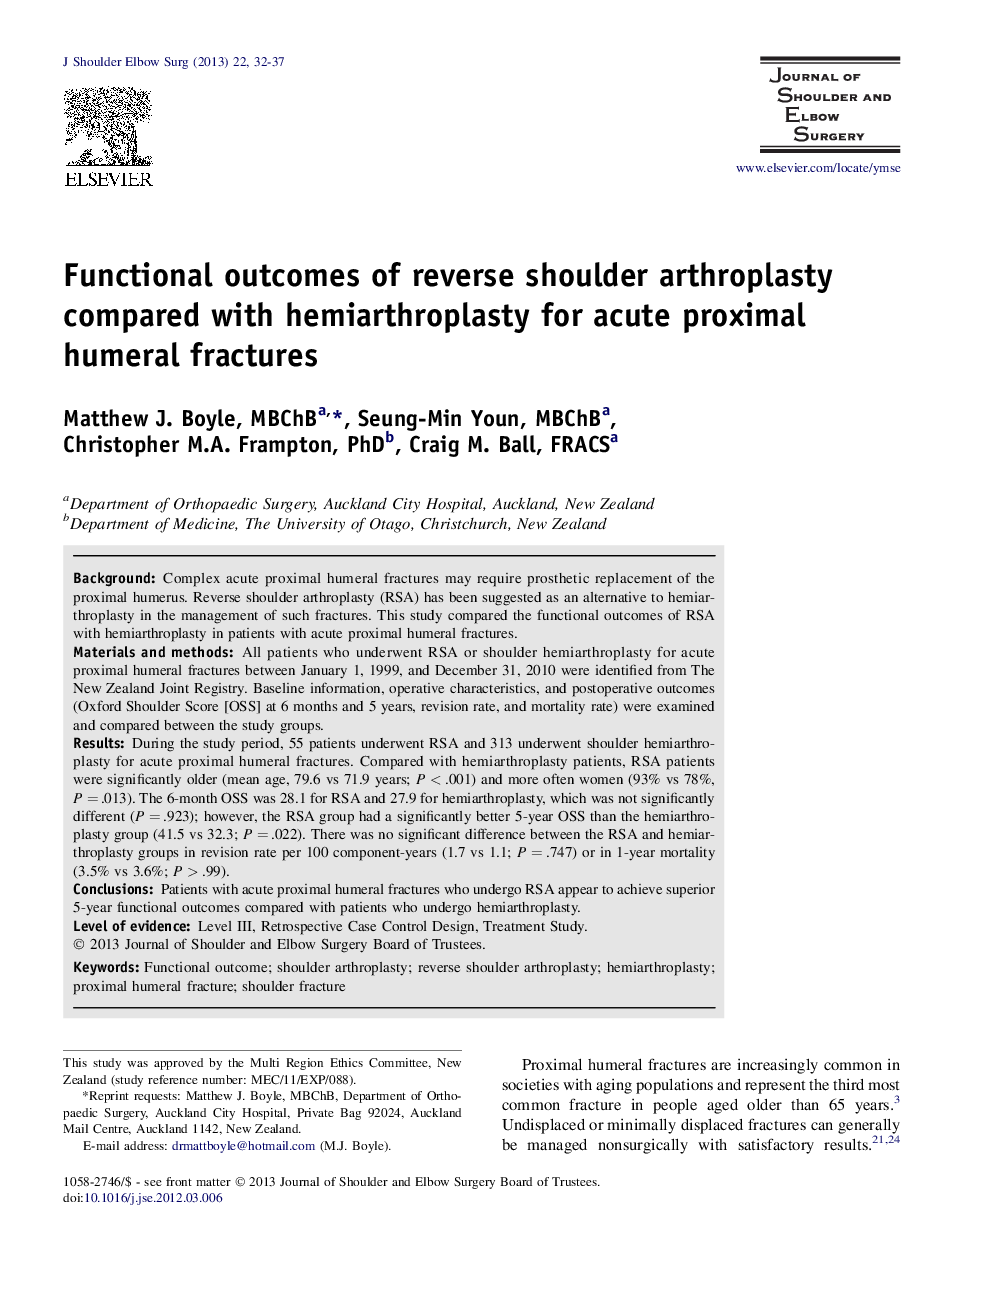 Functional outcomes of reverse shoulder arthroplasty compared with hemiarthroplasty for acute proximal humeral fractures 